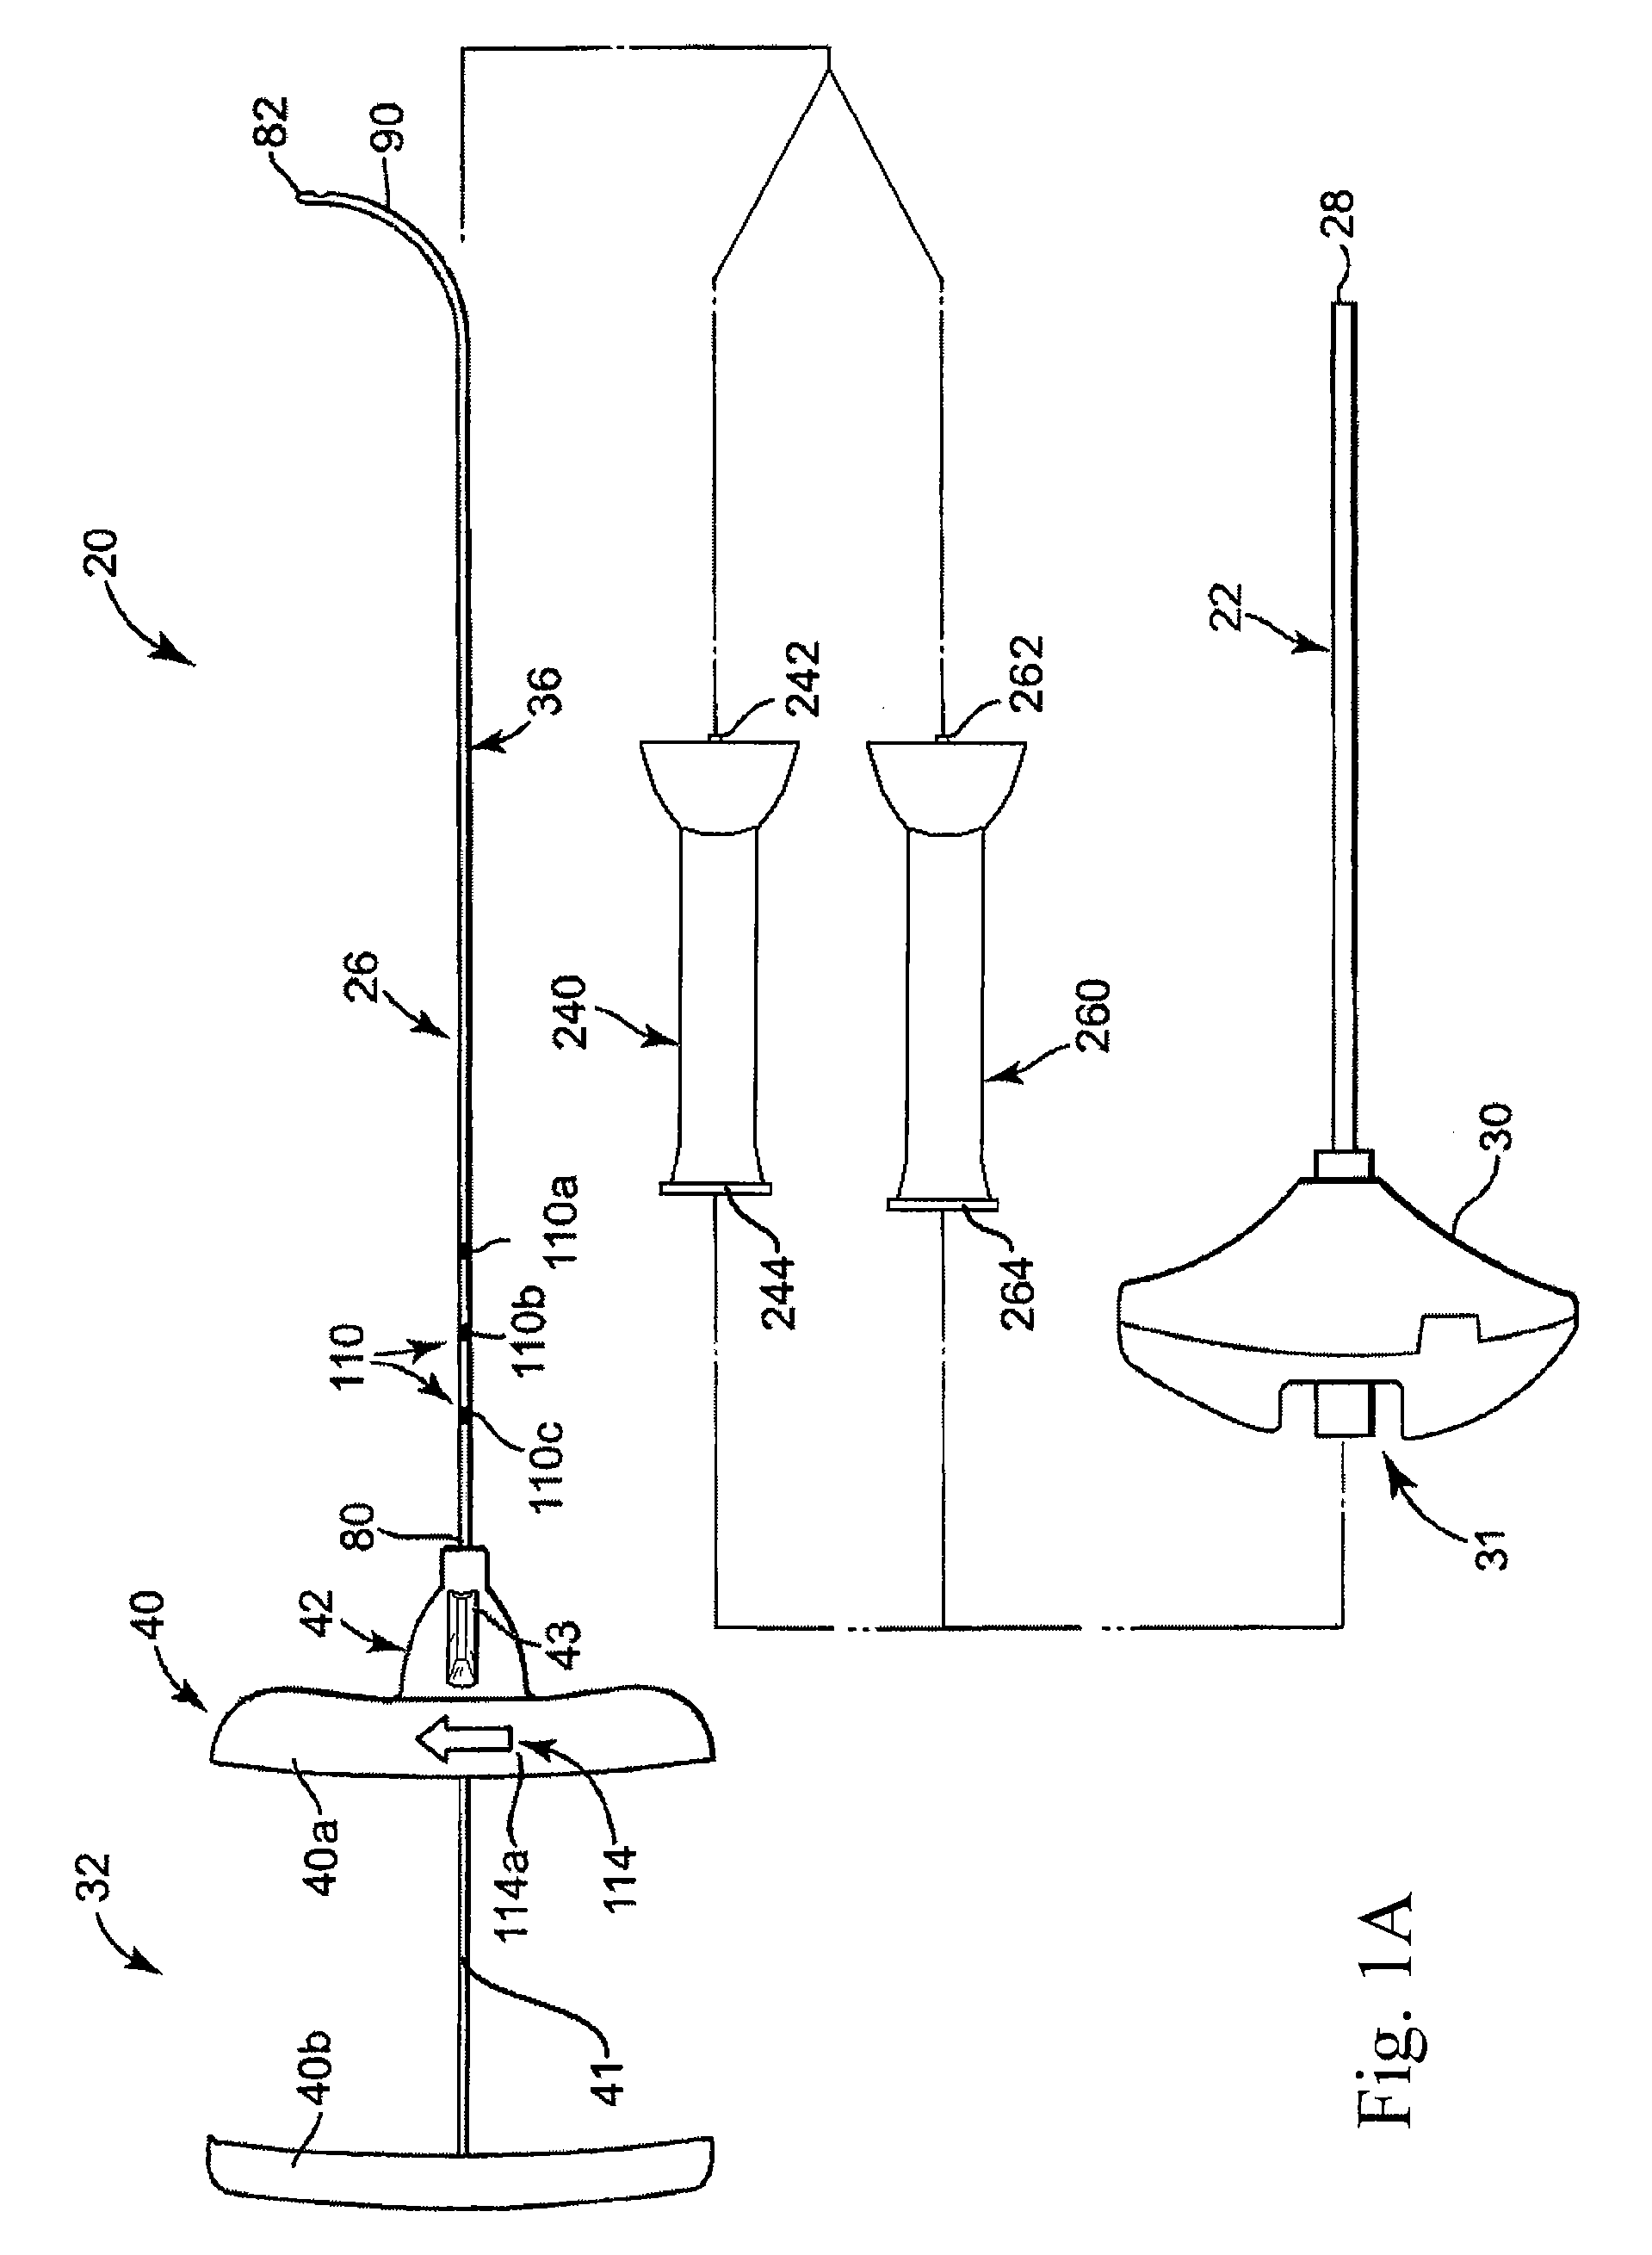 Device, system, and method for forming a cavity in and delivering a curable material into bone